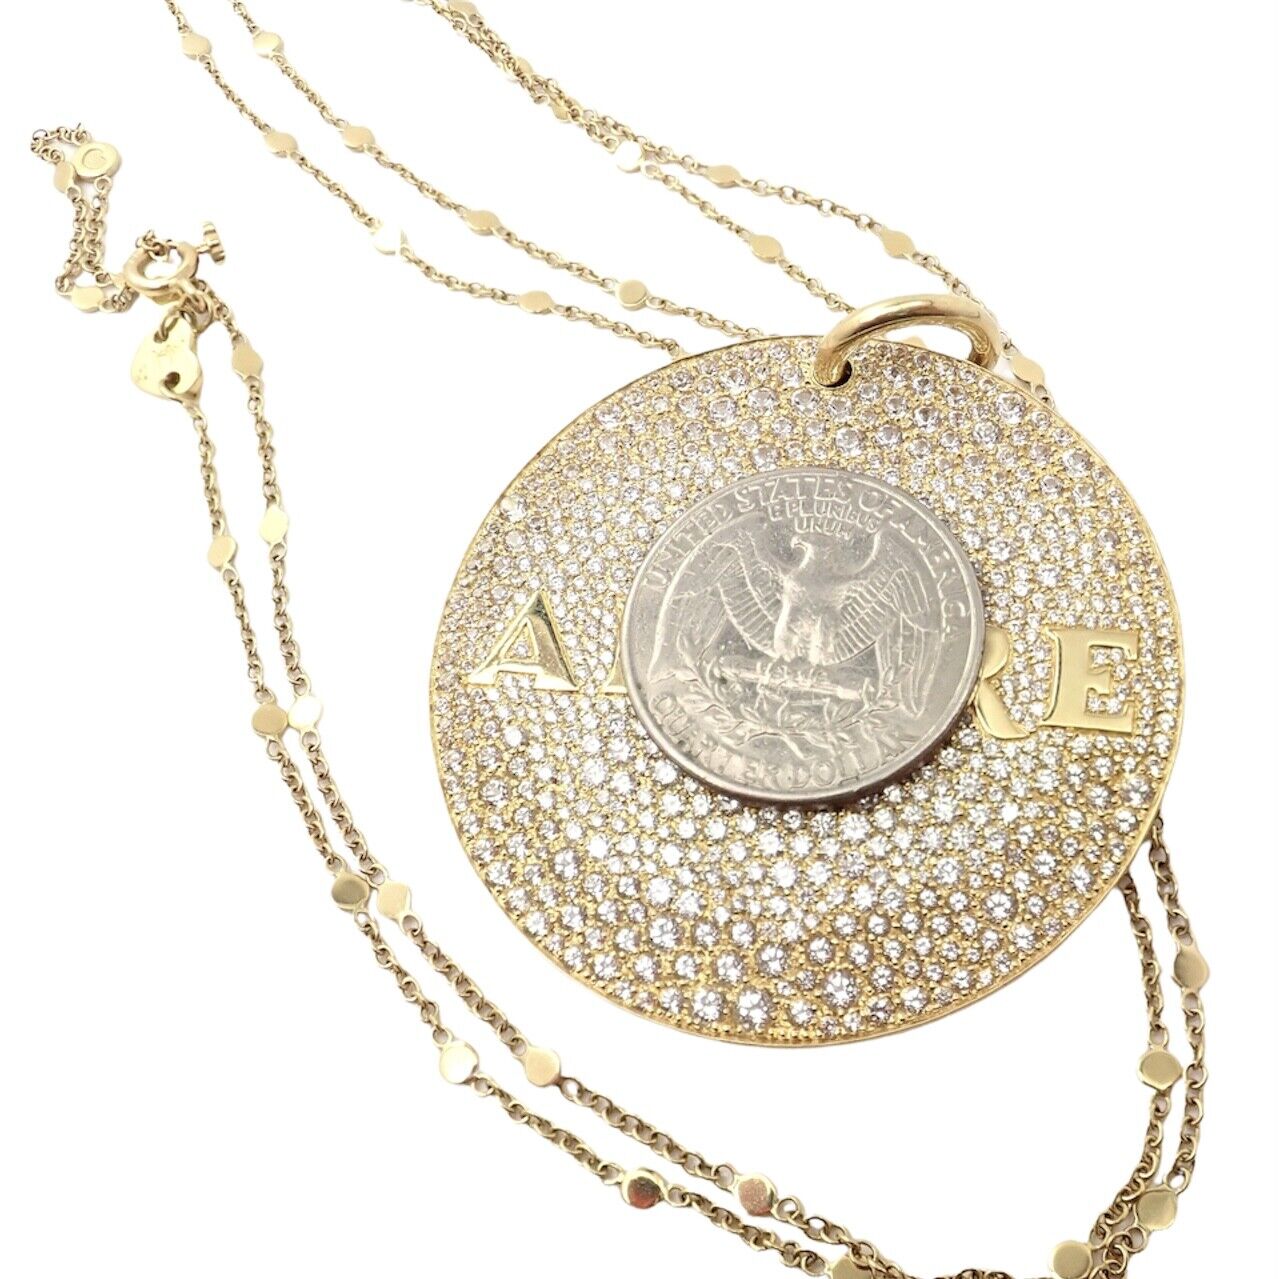 Pasquale Bruni Jewelry & Watches:Fine Jewelry:Necklaces & Pendants Pasquale Bruni 18k Yellow Gold Extra Large Diamond + Sapp Amore Pendant Necklace